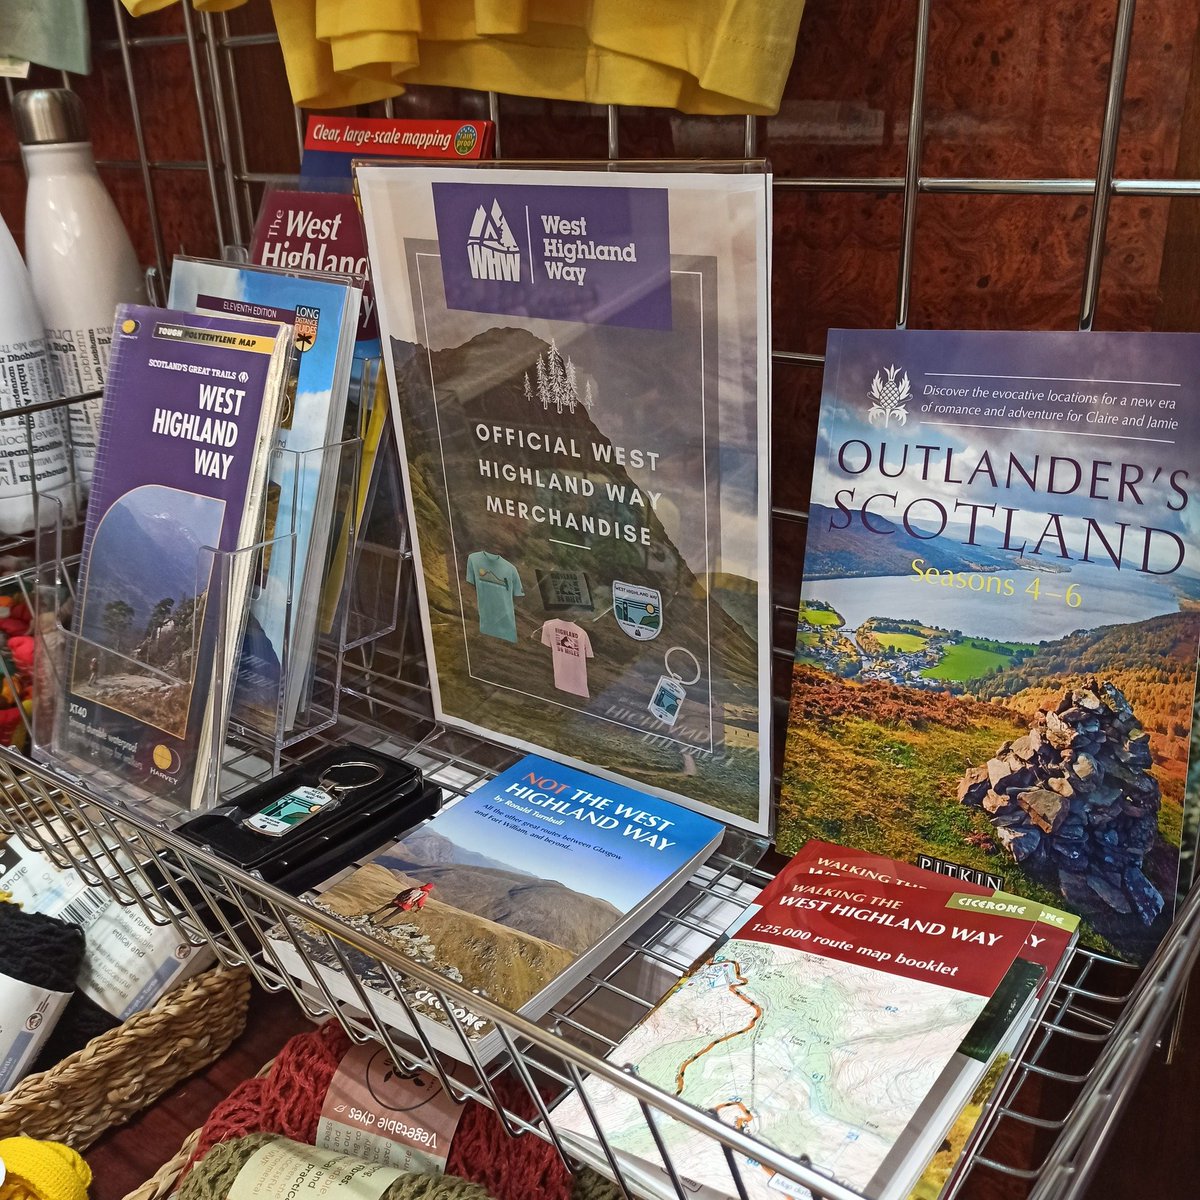 We have all your West Highland Way merch at Gavin's Mill. T-shirts, water bottles, enamel mugs, and hats for all weather! Get your passport here, and make sure to get it stamped. And if you need guide books - we have them too! #westhighlandway #WHW @official_whw